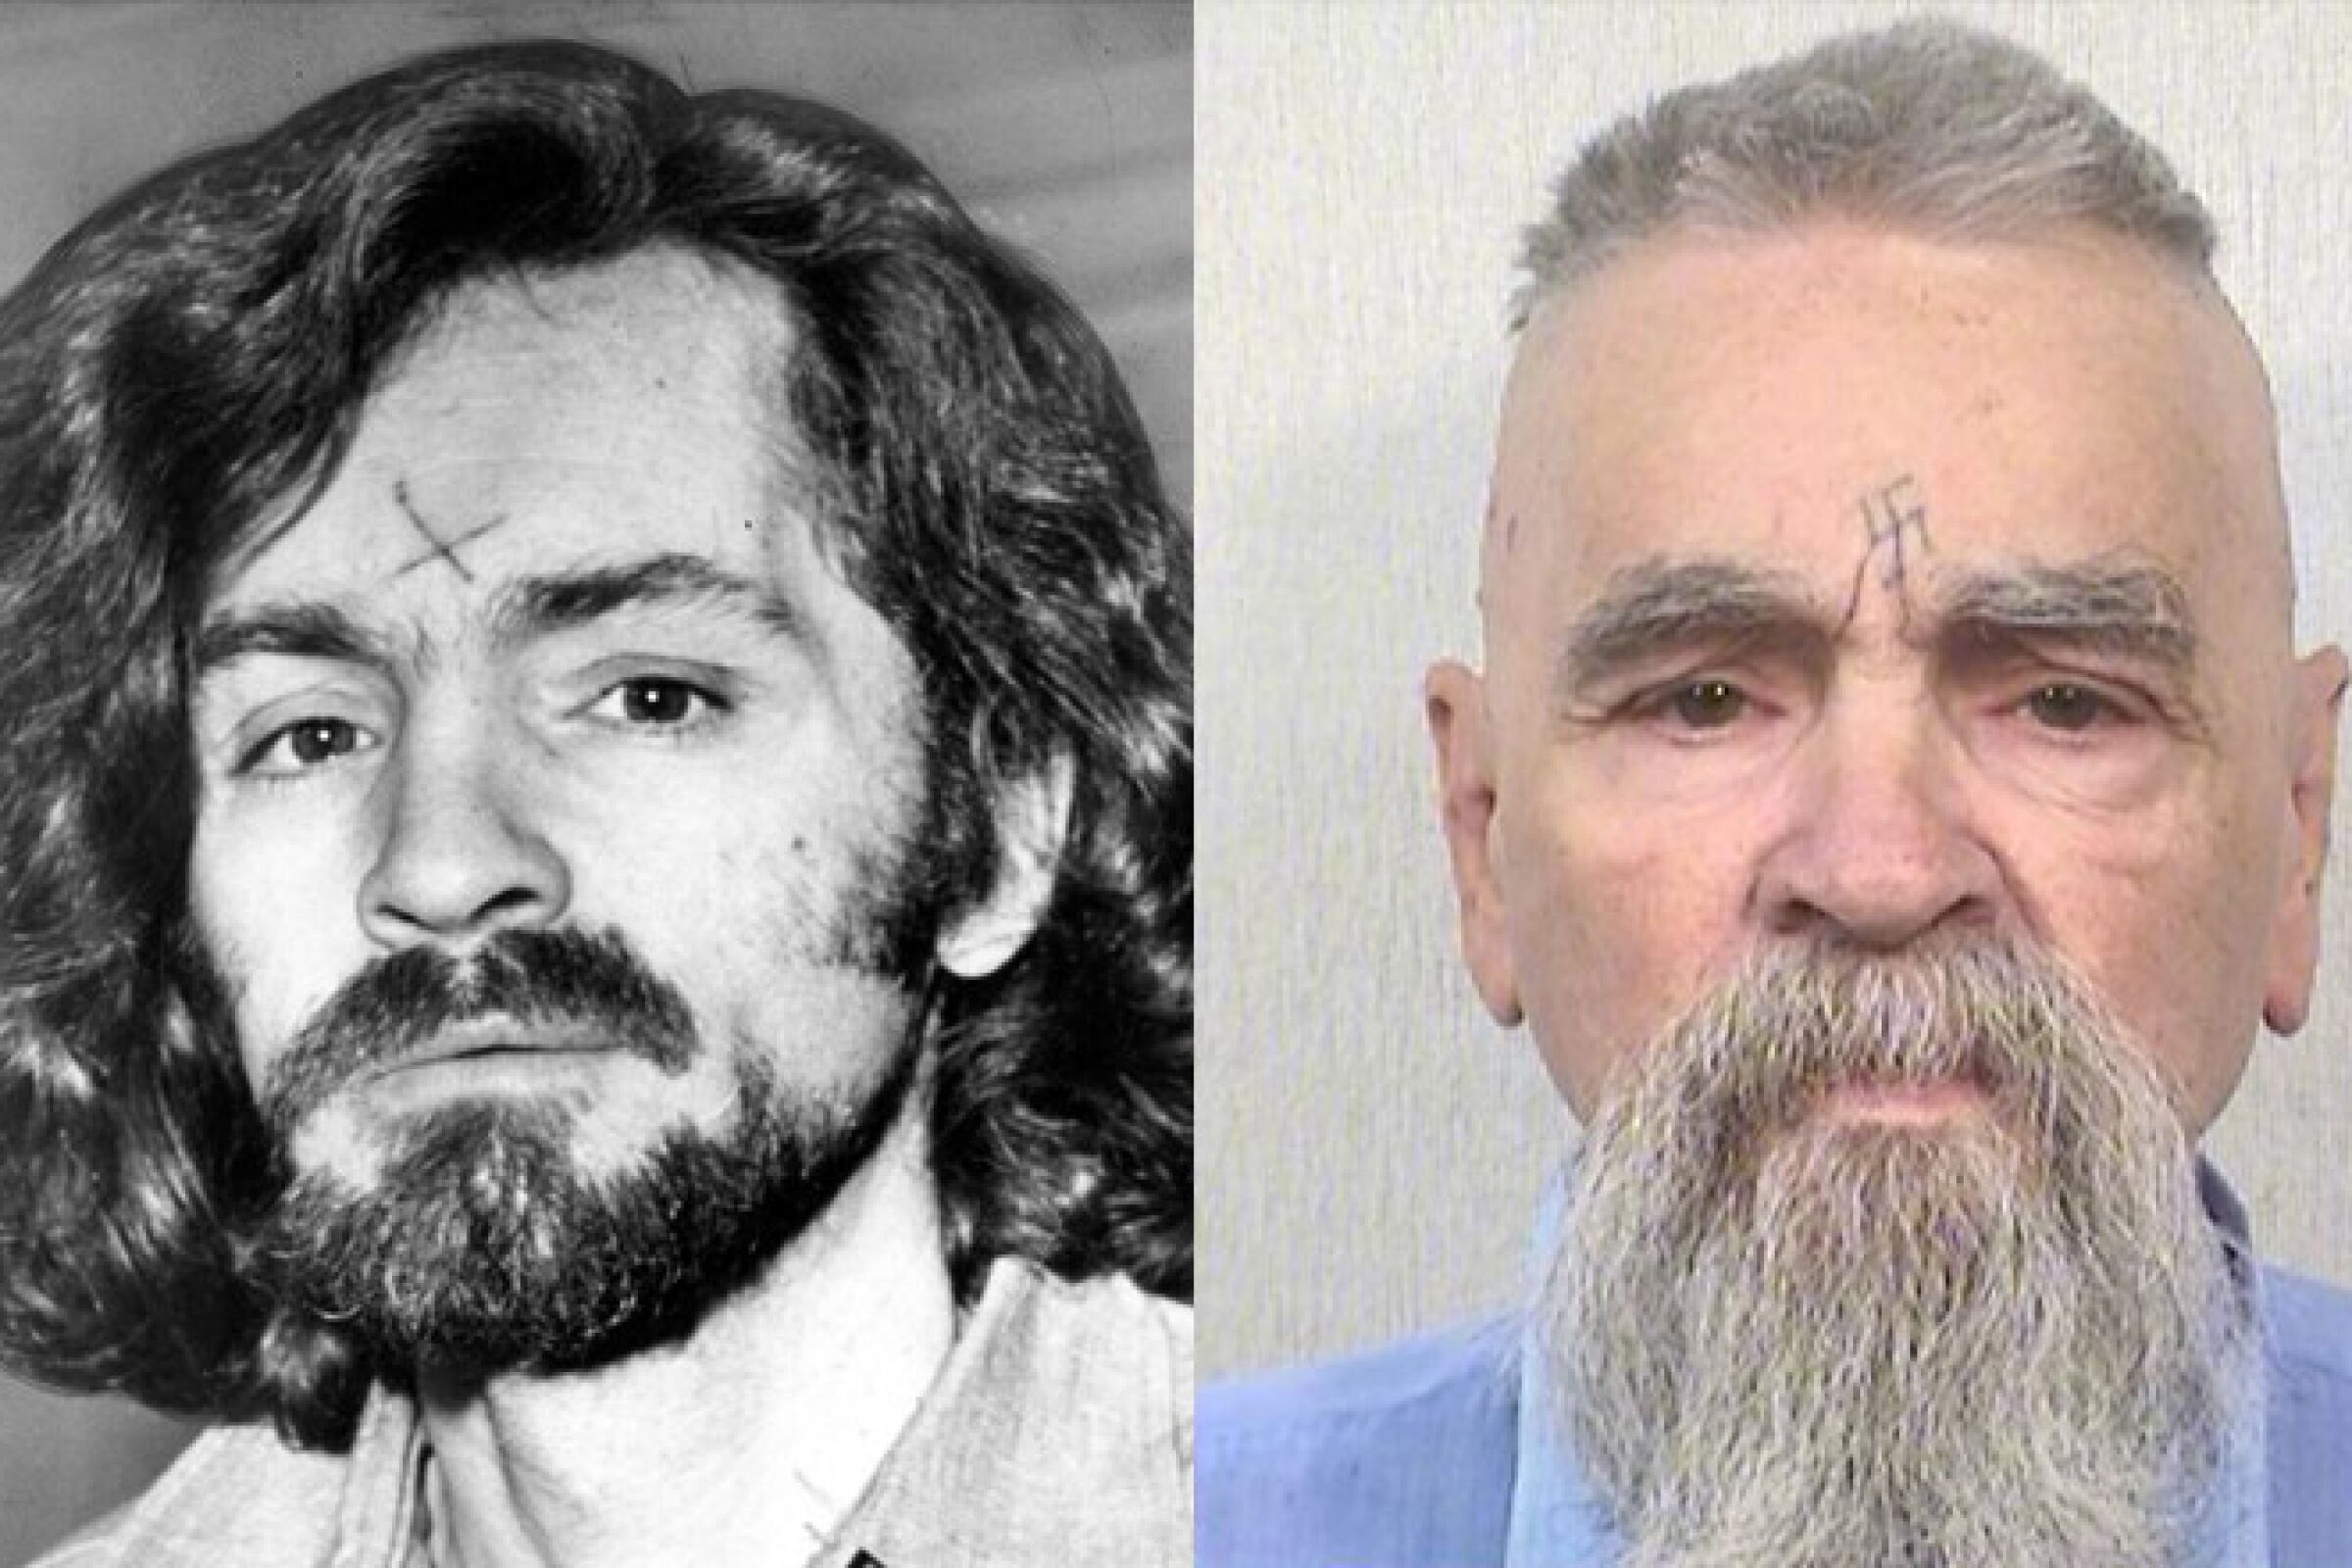 Charles Manson, at left, on his way to court in 1970 and, at right, in 2014.